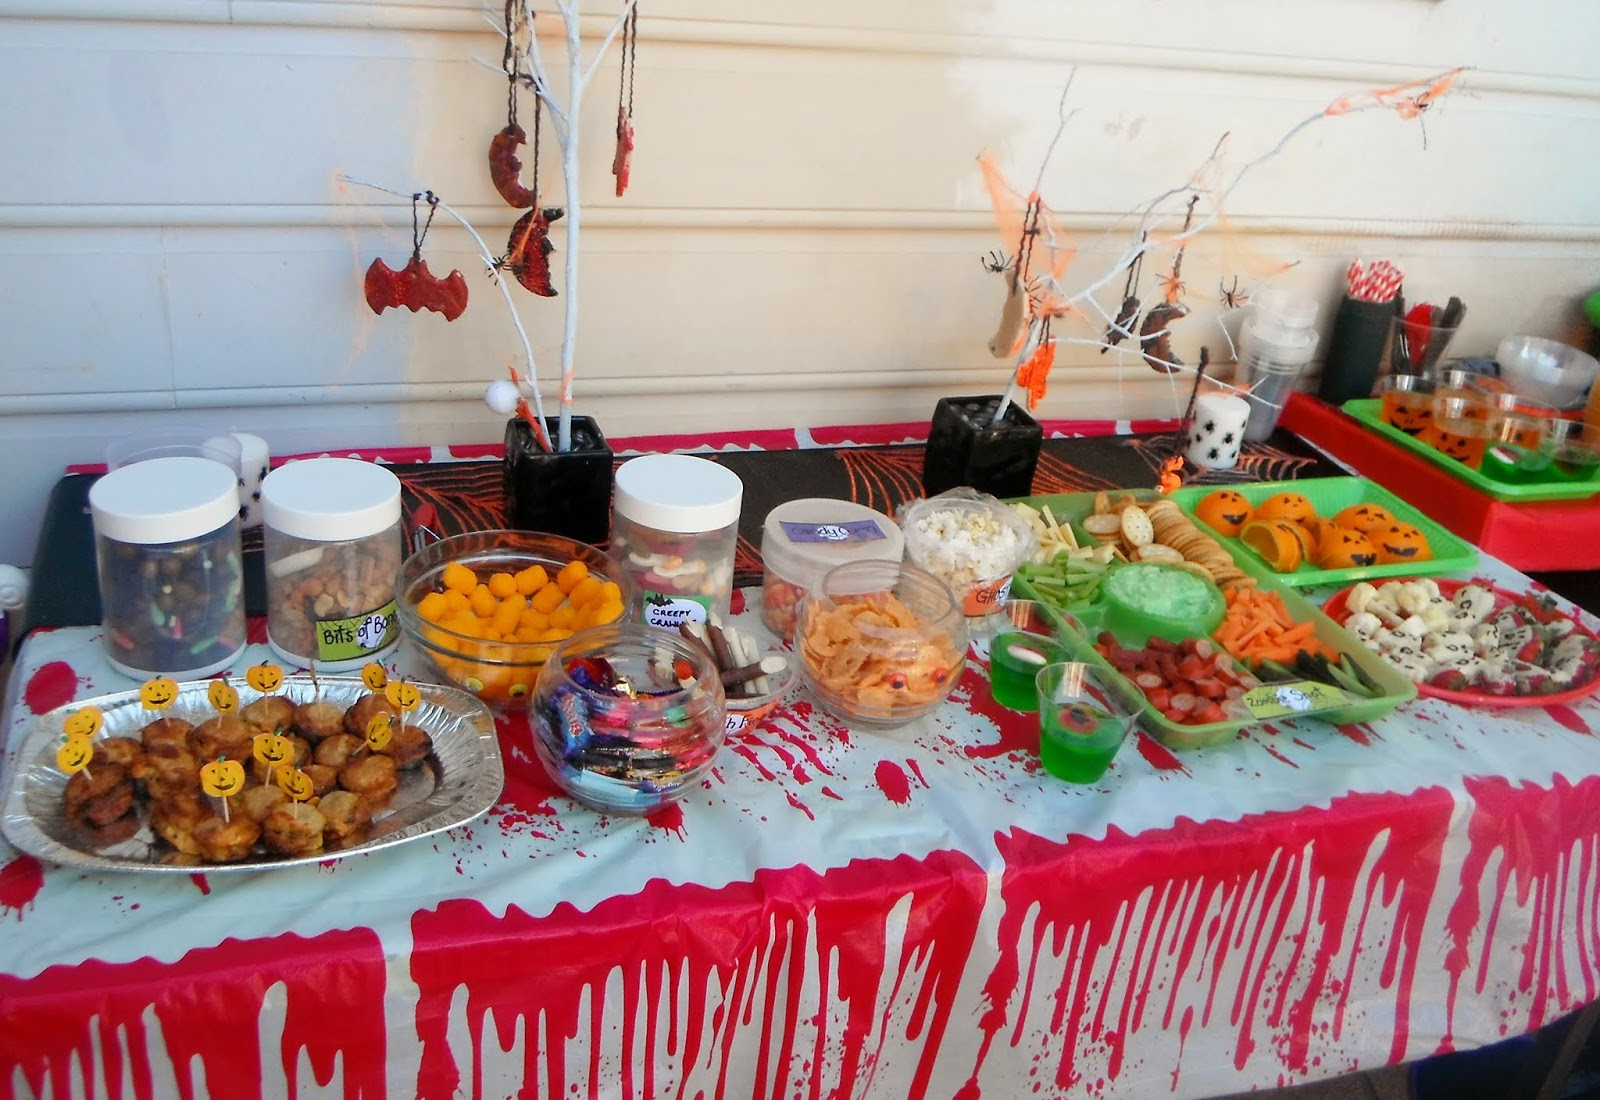 Halloween Party Foods For Kids
 Adventures at home with Mum Halloween Party Food